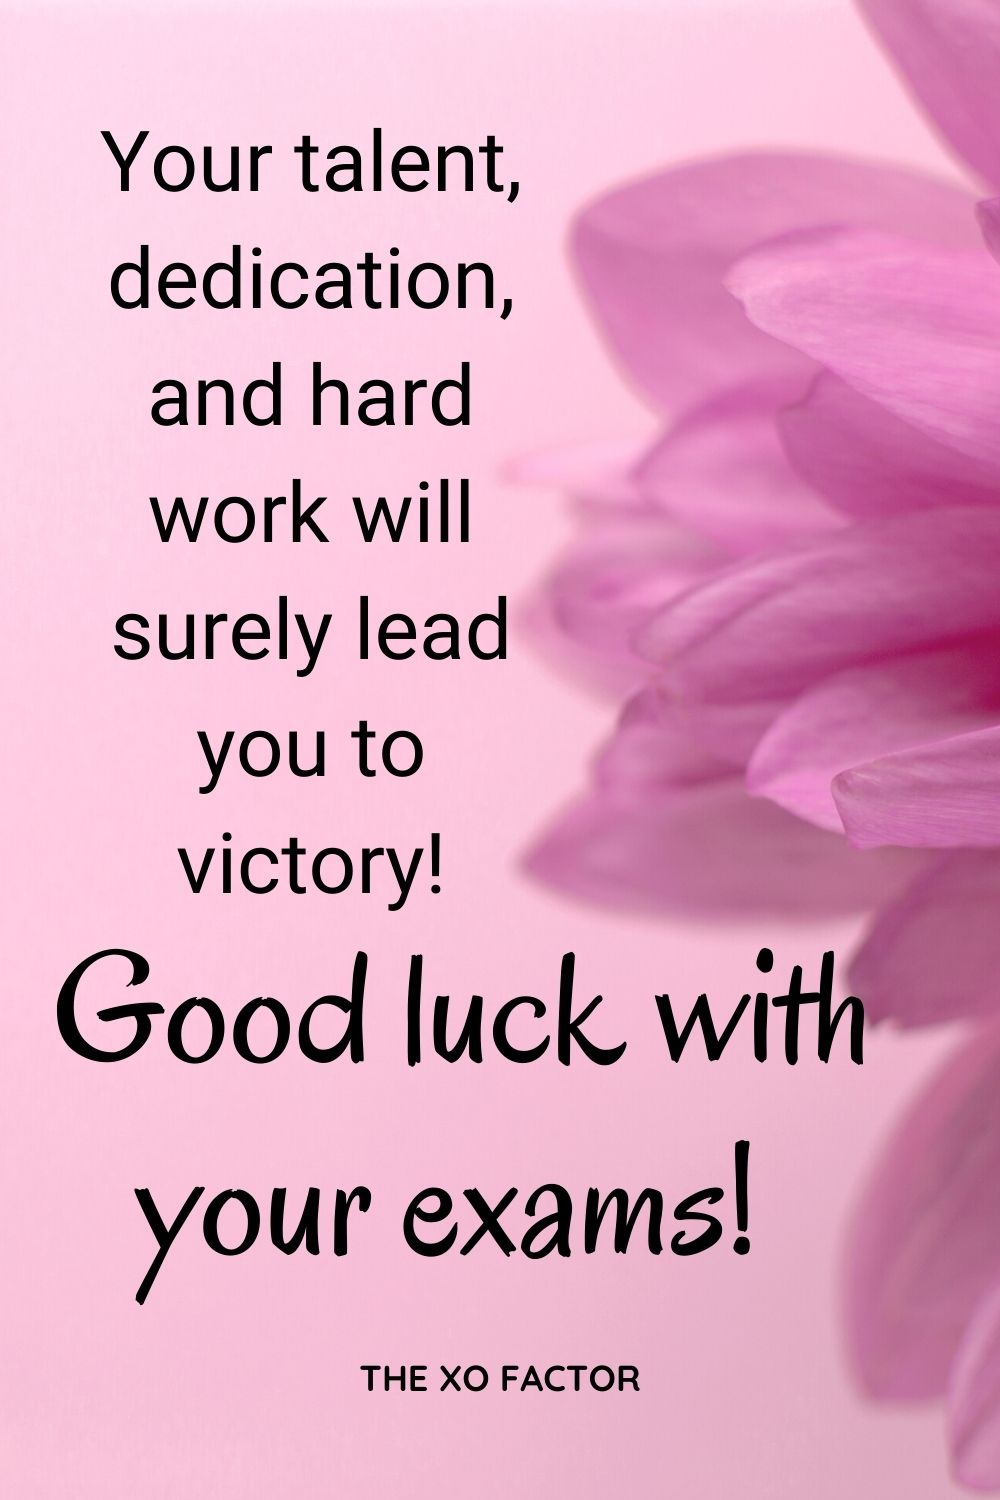 Your talent, dedication, and hard work will surely lead you to victory! Good luck with your exams!